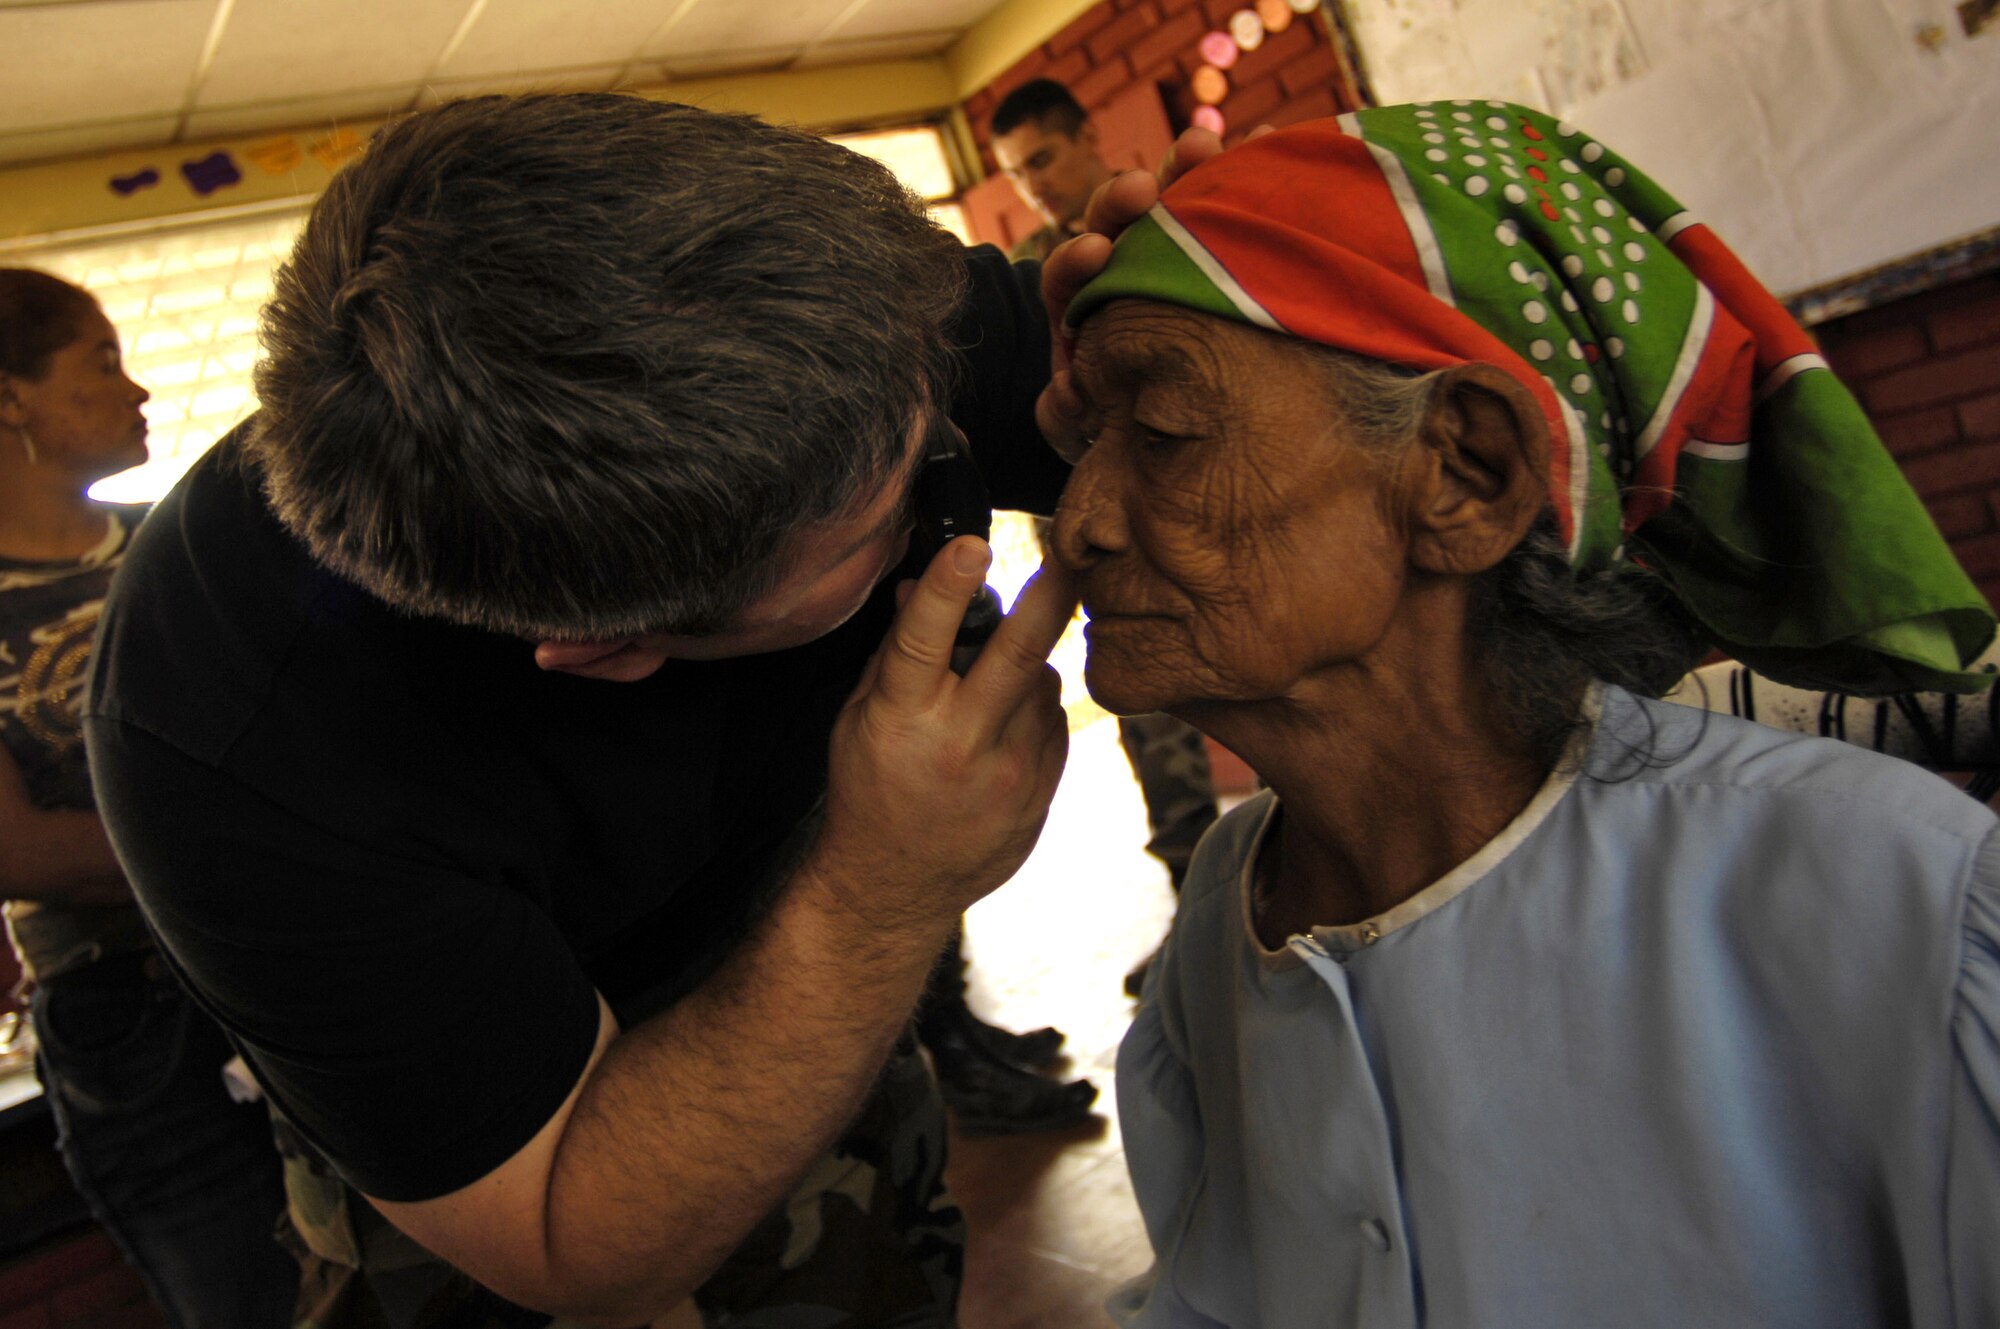 Maj. Michael Osterhoudt assesses a woman's eyesight while participating in Medical Readiness Training Exercises in Santa Teresa Feb. 26 during New Horizons - Nicaragua 2007. The $7.25 million joint U.S. and Nicaraguan military humanitarian and training exercise, provides a new school and medical clinic, as well as free health and veterinary care, giving aid and strengthening bonds between the two nations. Major Osterhoudt is from the 9th Medical Group at Beale Air Force Base, Calif. (U.S. Air Force photo/Tech. Sgt. Kevin P. Milliken)
